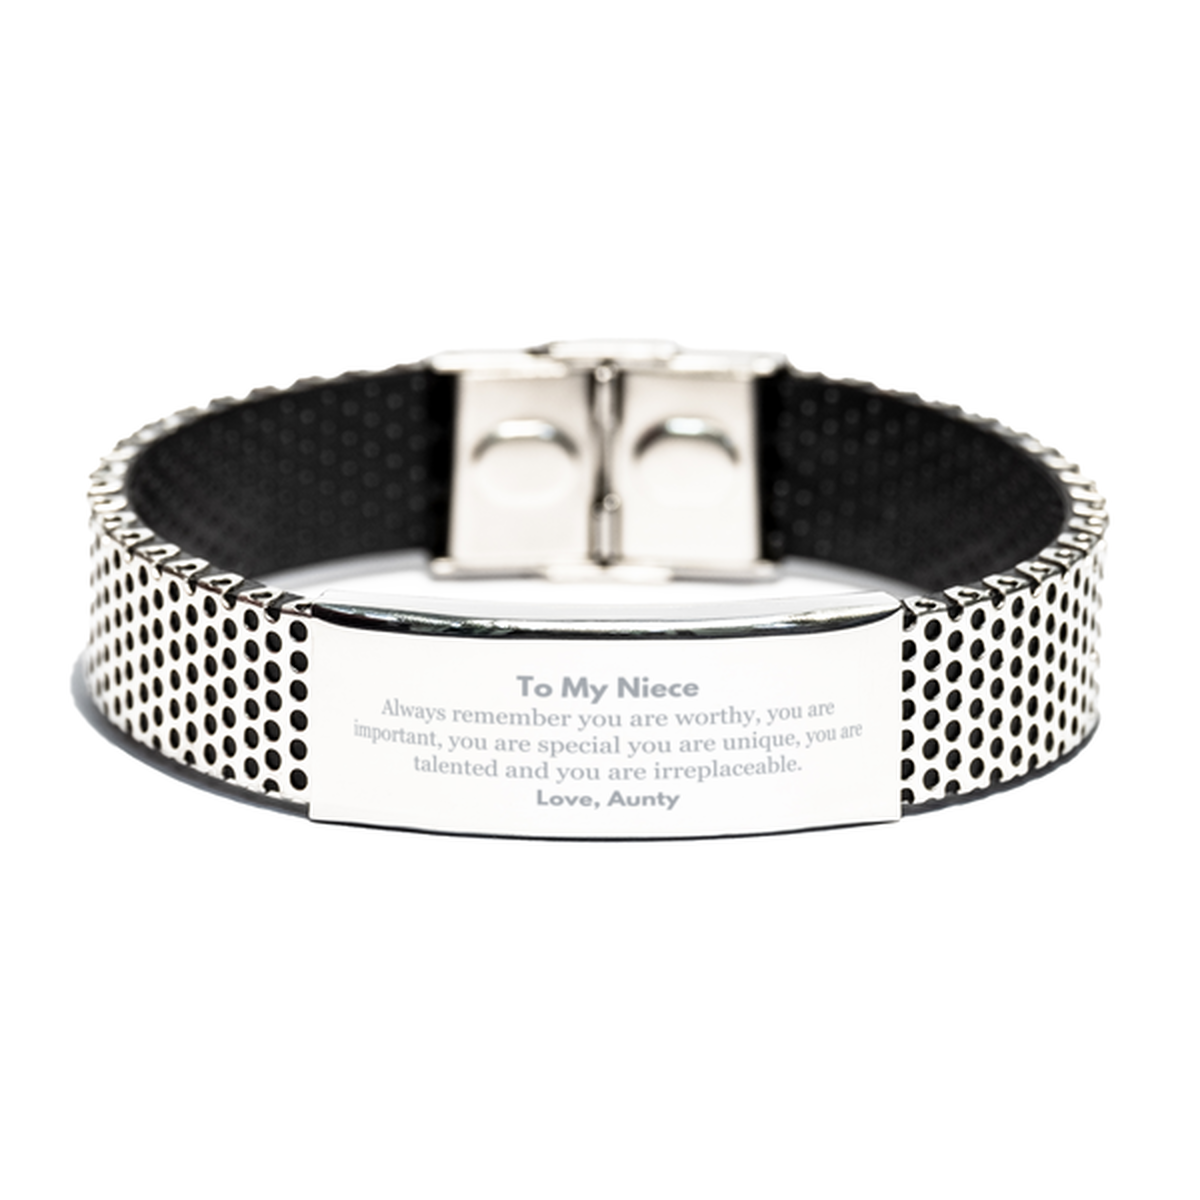 Niece Birthday Gifts from Aunty, Inspirational Stainless Steel Bracelet for Niece Christmas Graduation Gifts for Niece Always remember you are worthy, you are important. Love, Aunty